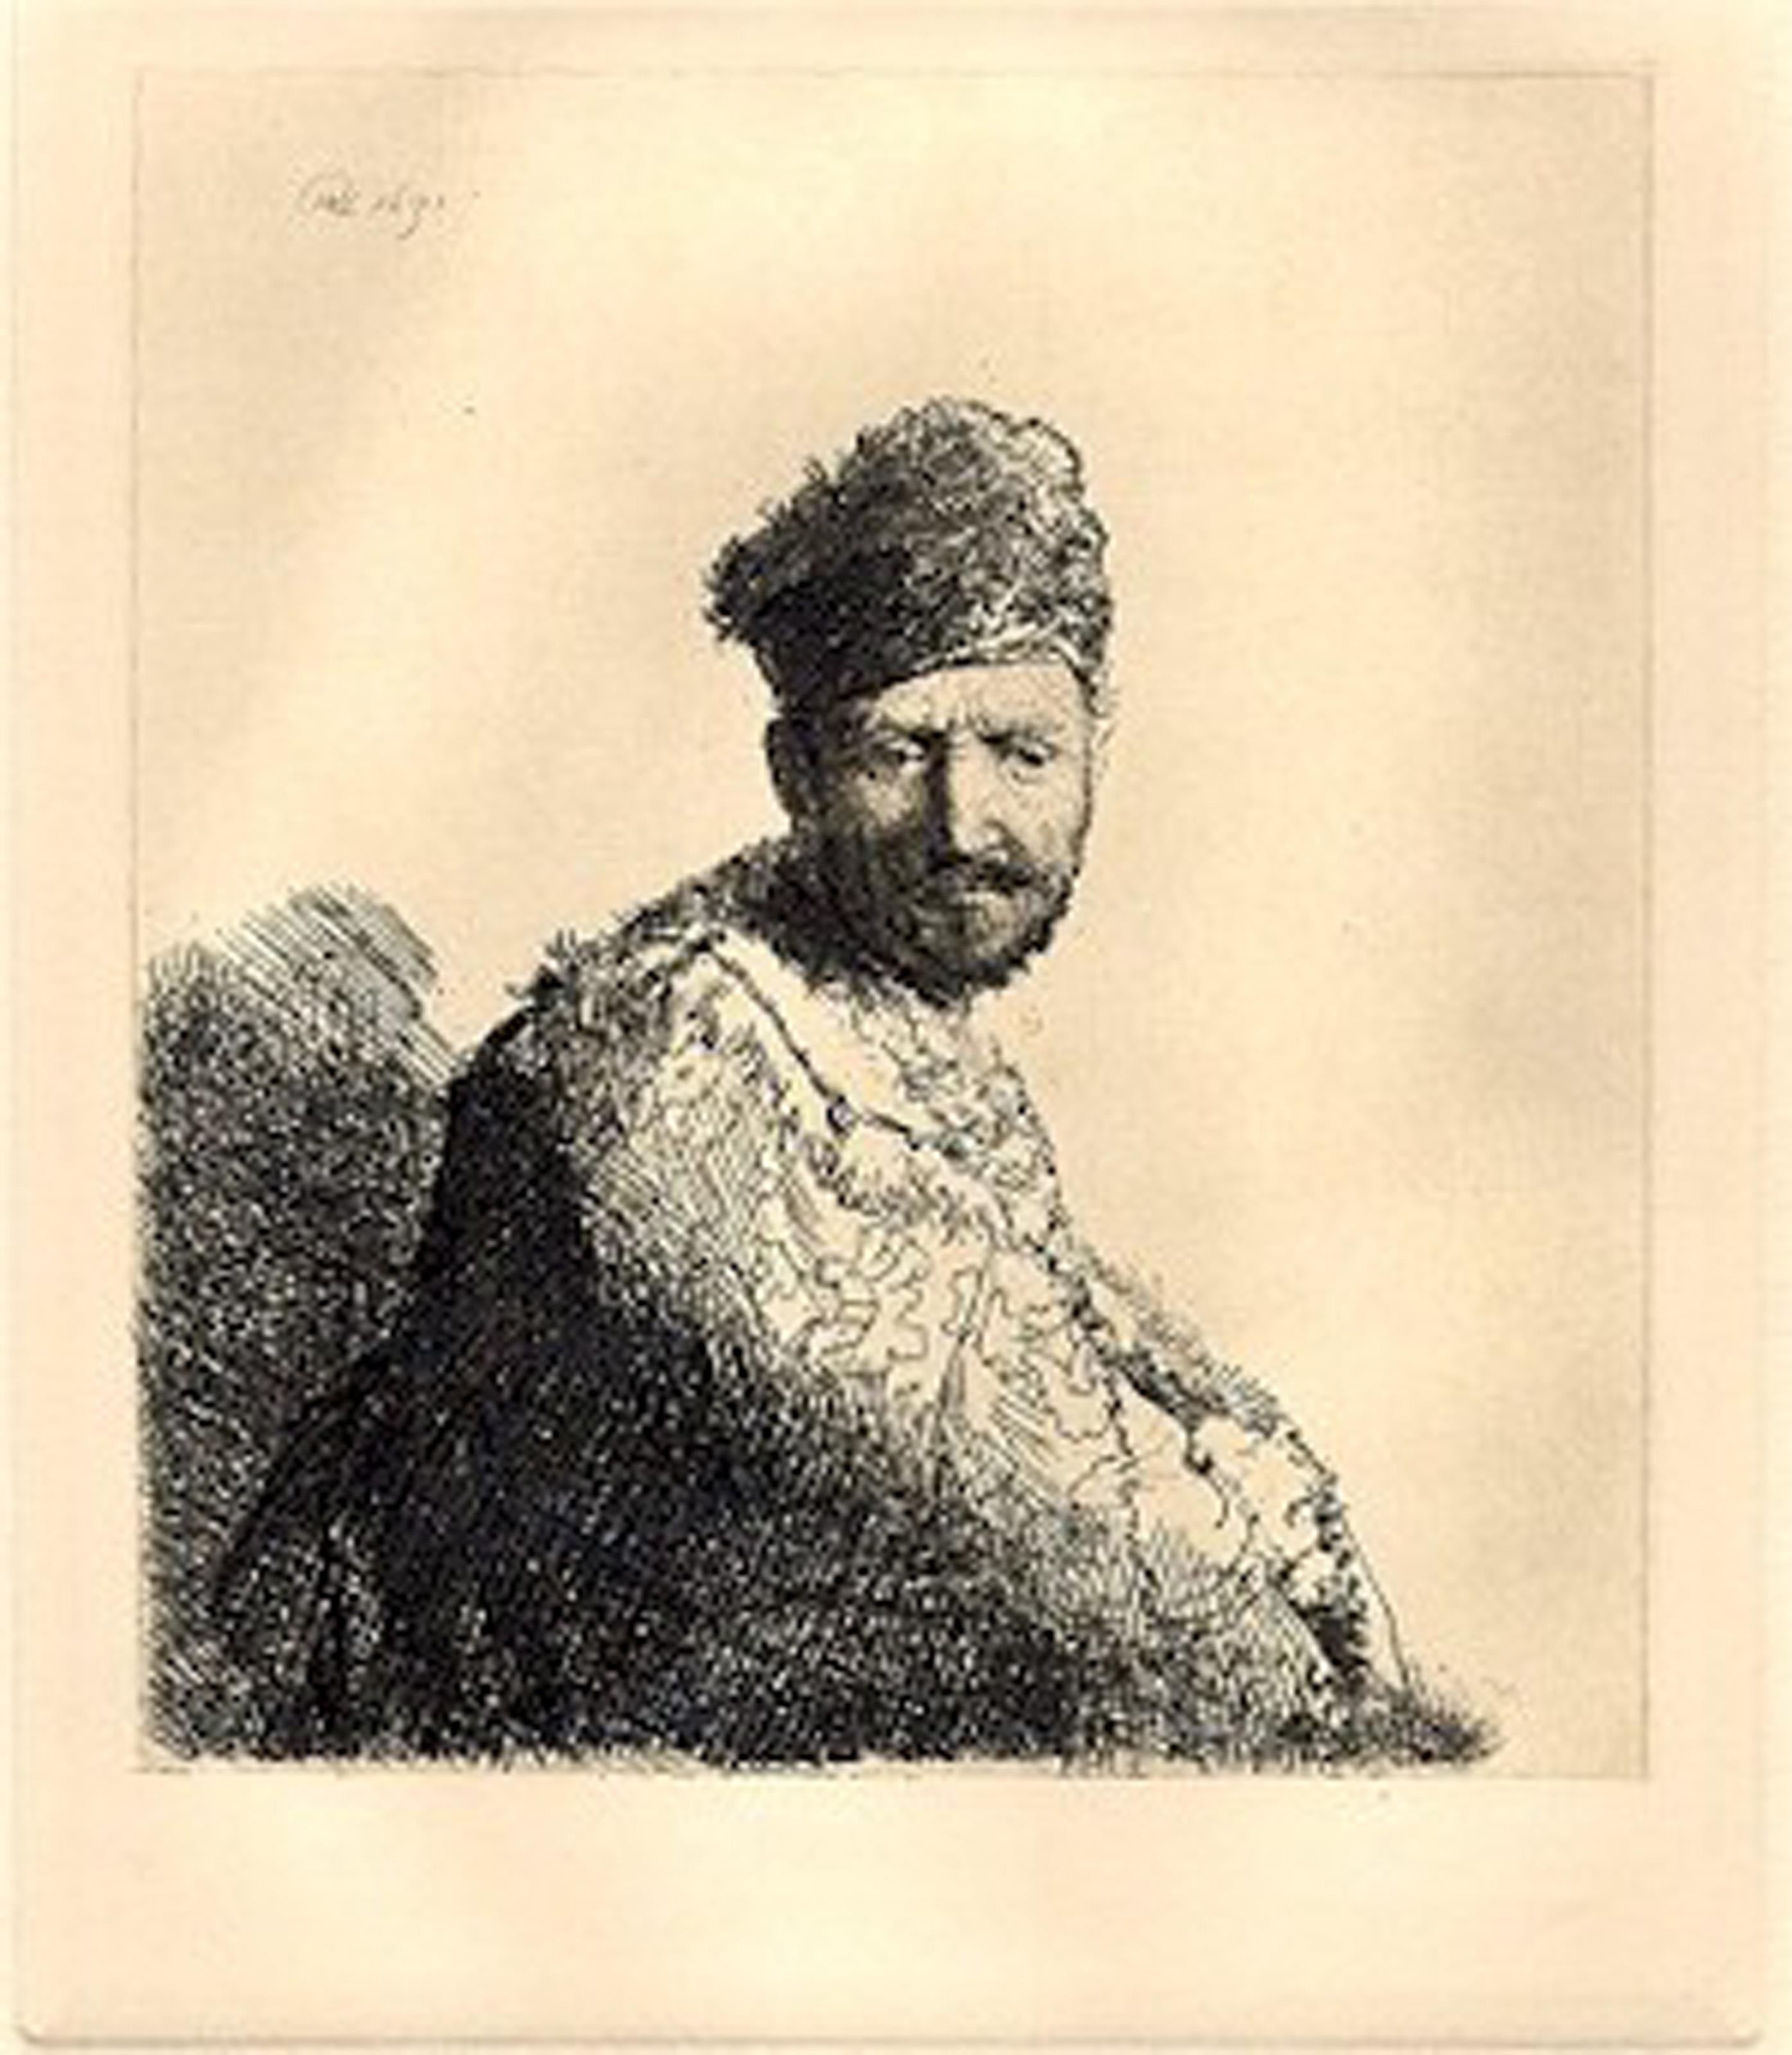  Rembrandt van Rijn, After by Amand Durand, Dutch (1606 - 1669) - Bearded Man in a Furred Oriental Cap and Robe, Year: Of Original 1631, Medium: Etching, Image Size: 6 x 5 inches, Size: 14  x 12 in. (35.56  x 30.48 cm), Printer: Amand Durand,